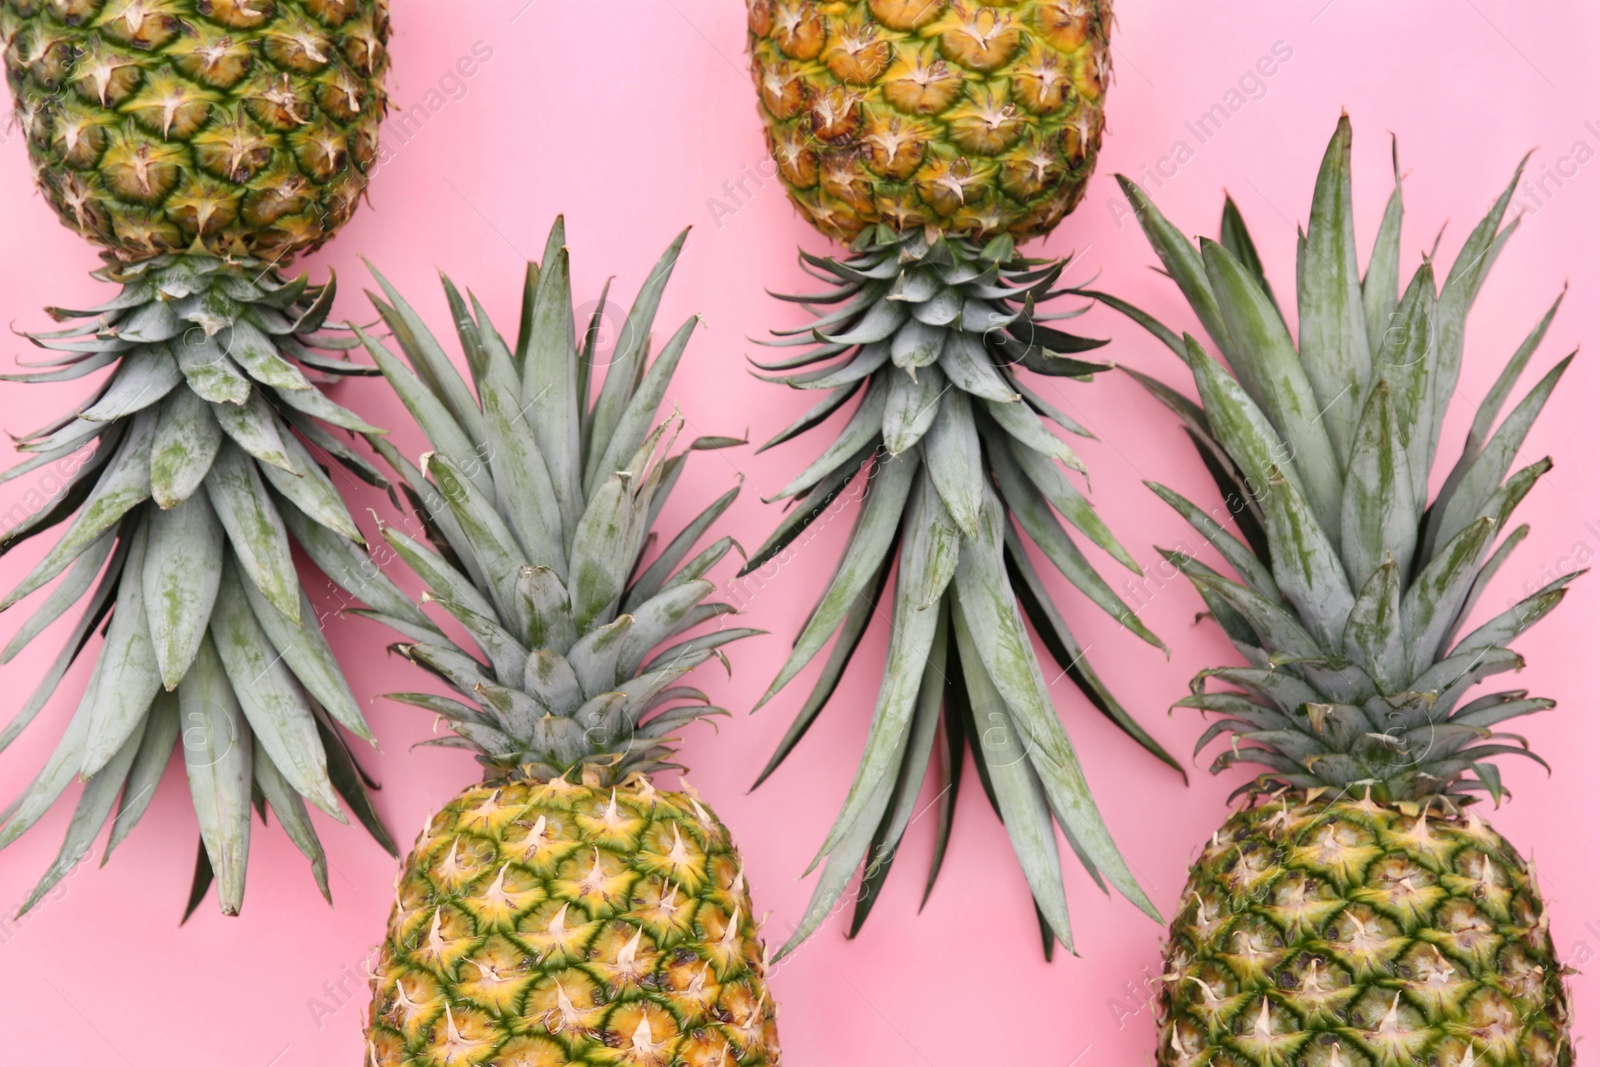 Photo of Delicious ripe pineapples on pink background, flat lay